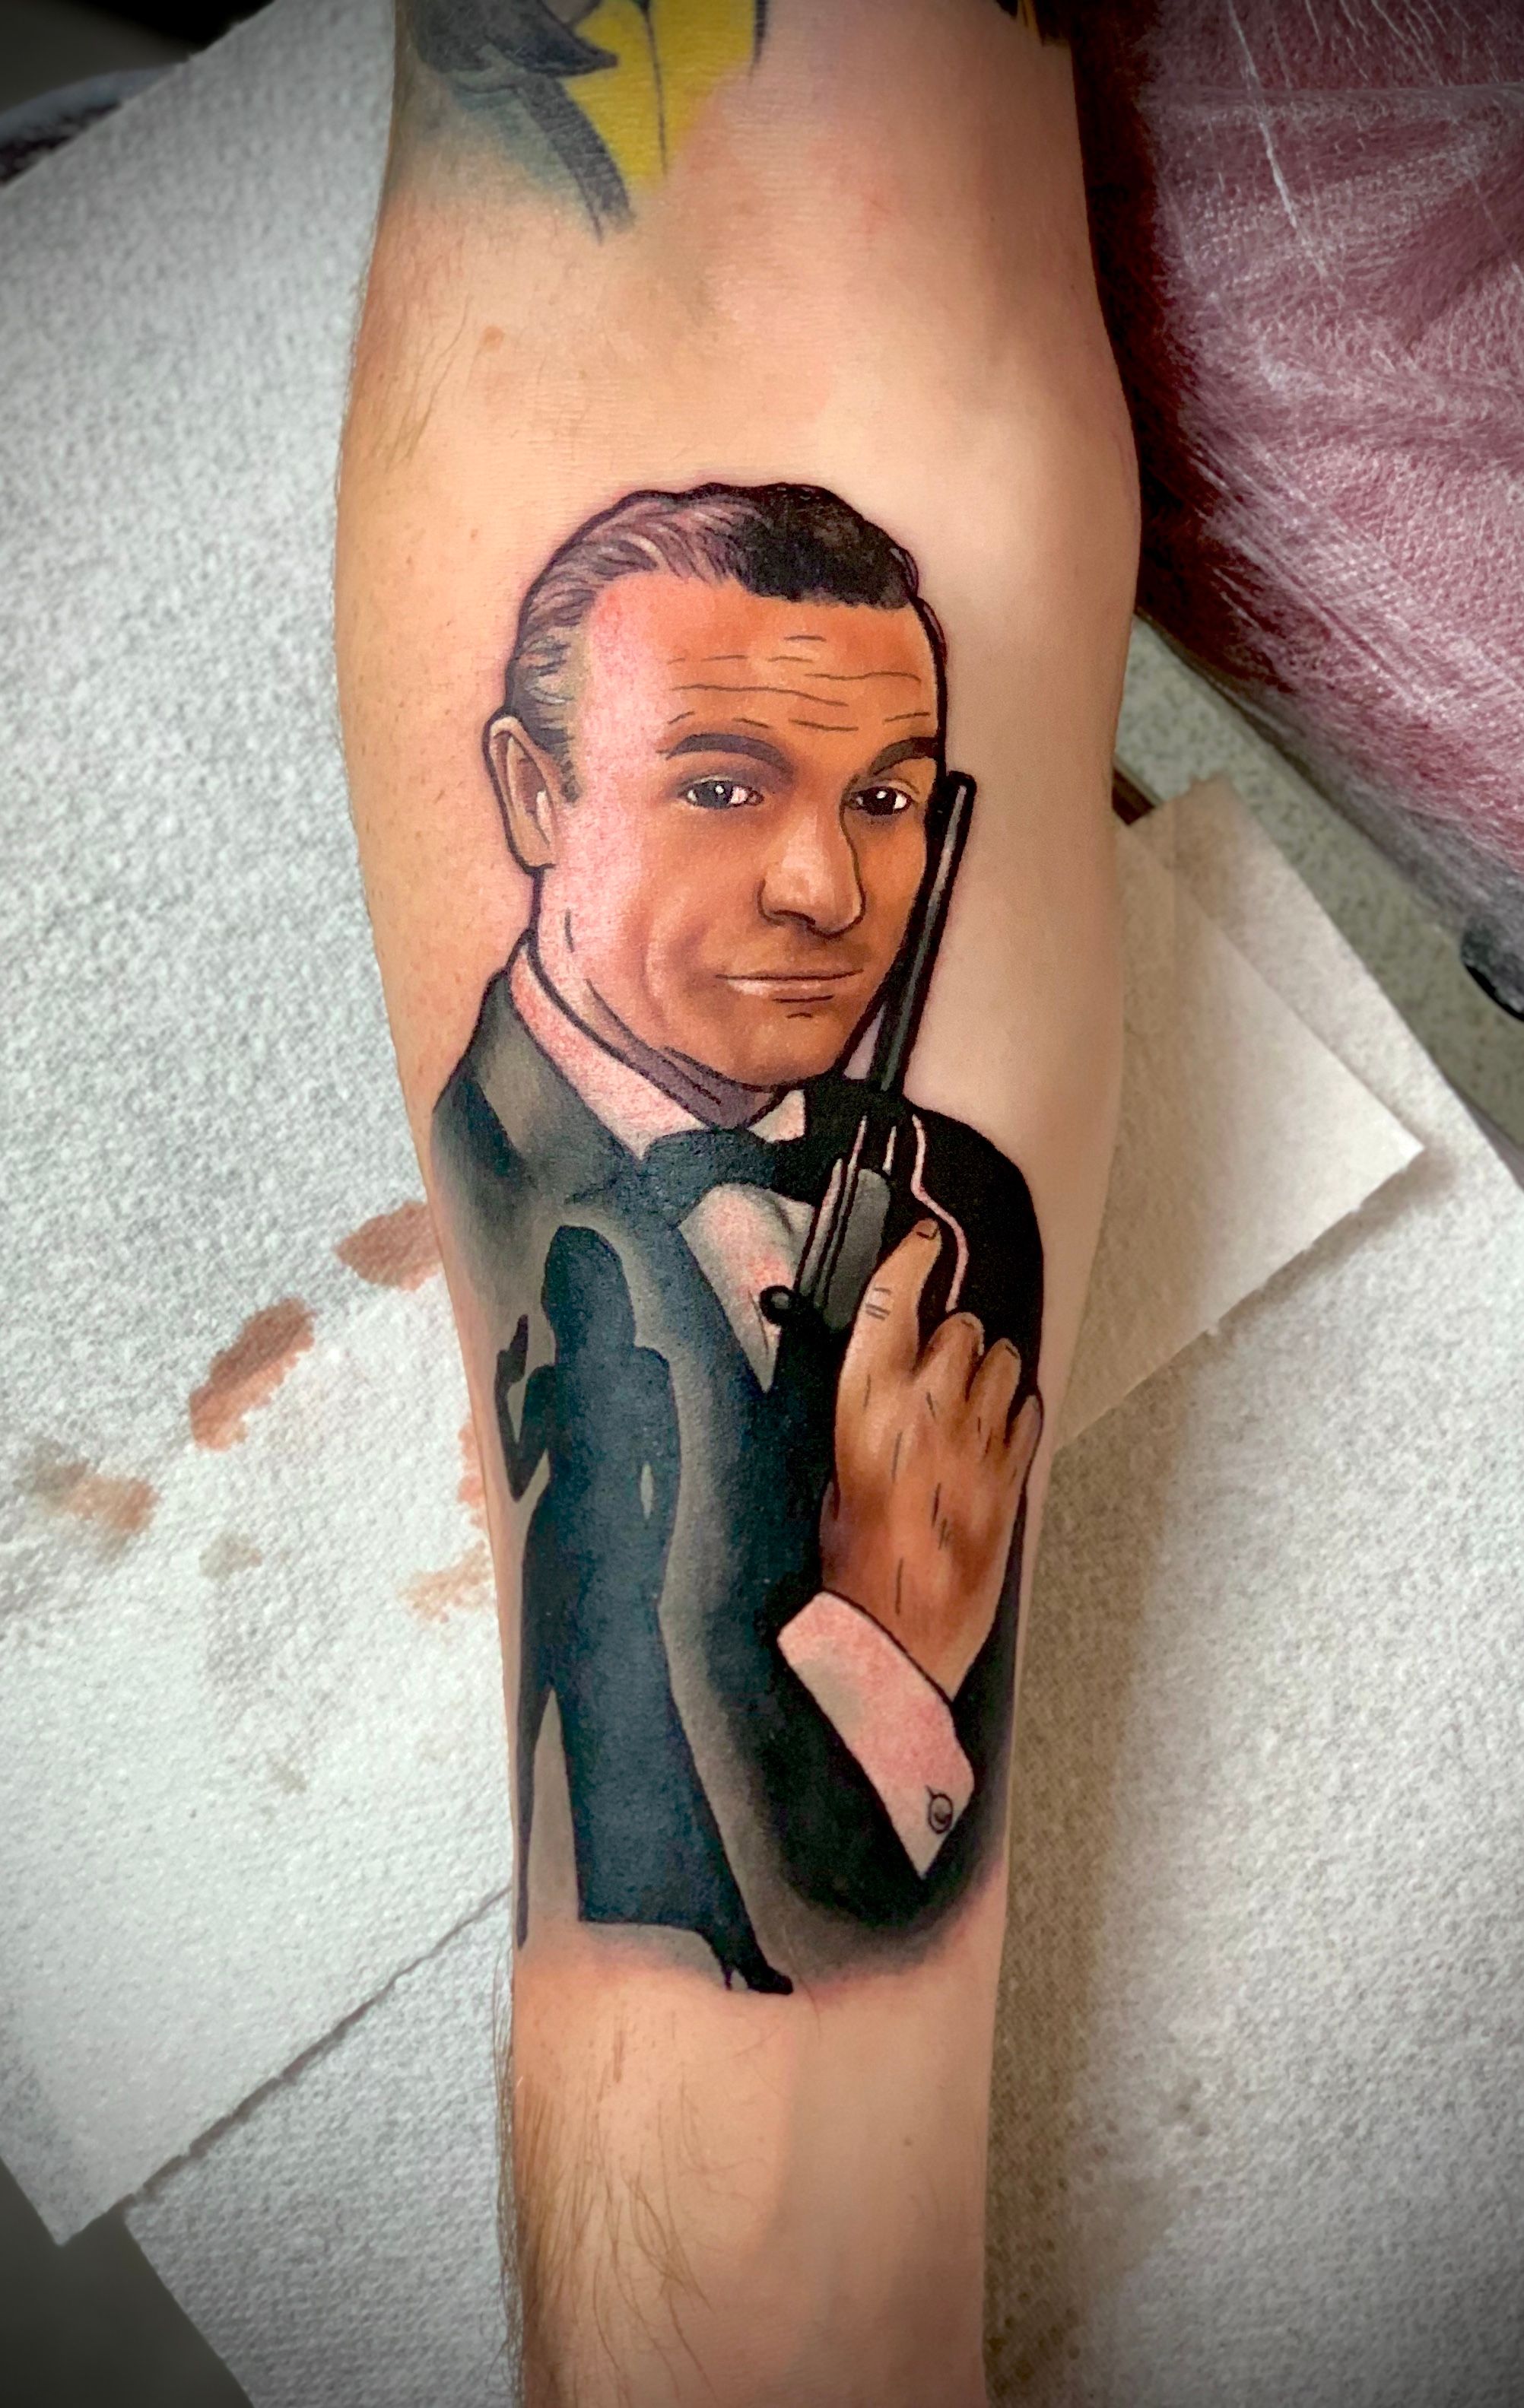 Calf tattoo of my favourite Bond Had the tattoo for years now but thought  you would all enjoy my sharing Added a side by side for comparison   rJamesBond